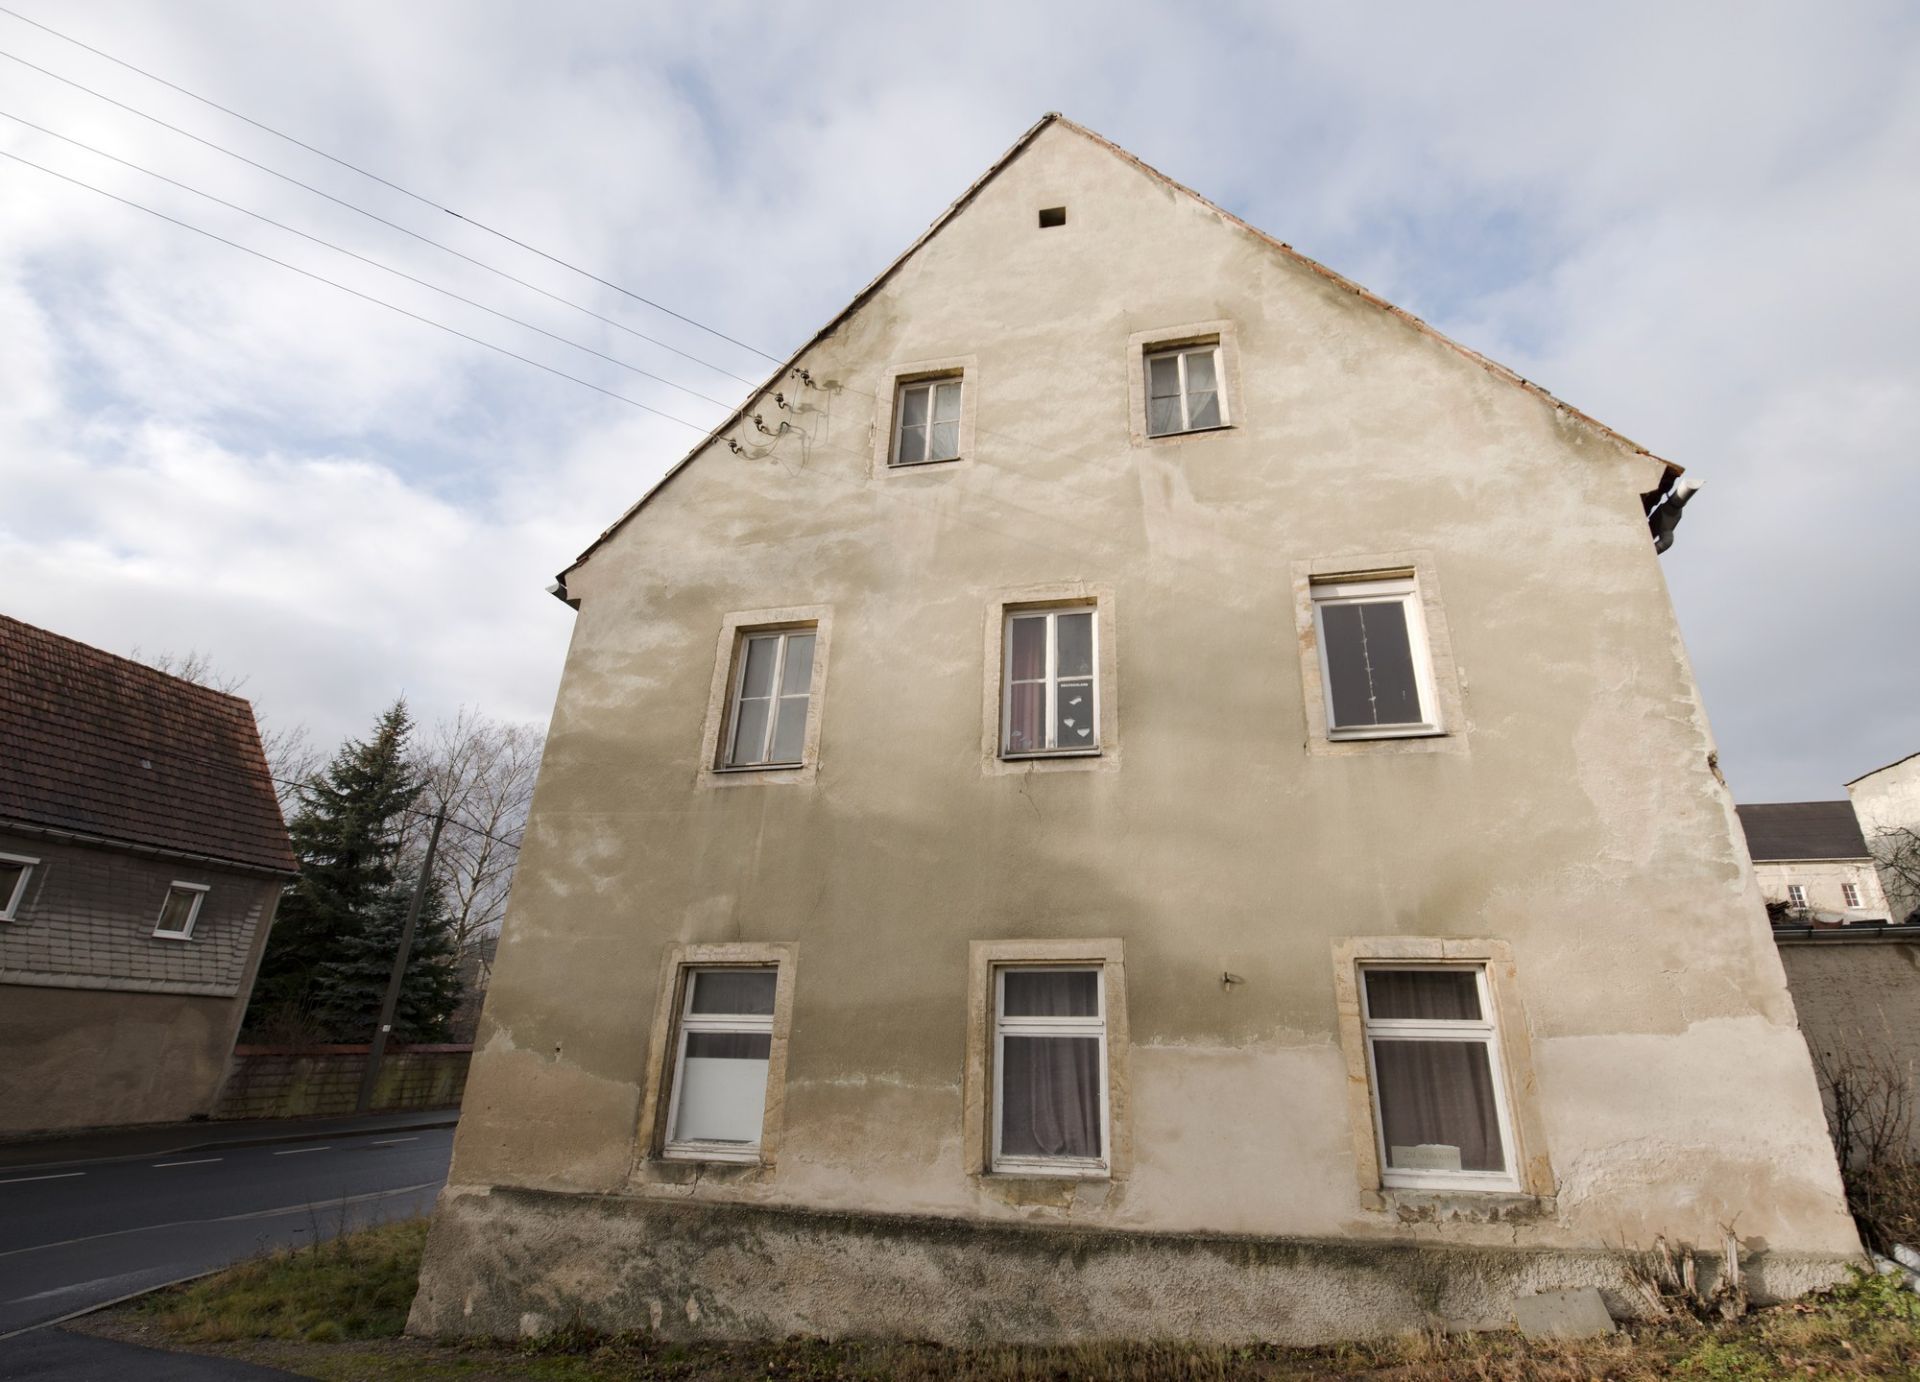 LARGE FORMER GUEST HOUSE IN NOSSEN, GERMANY - Image 2 of 47